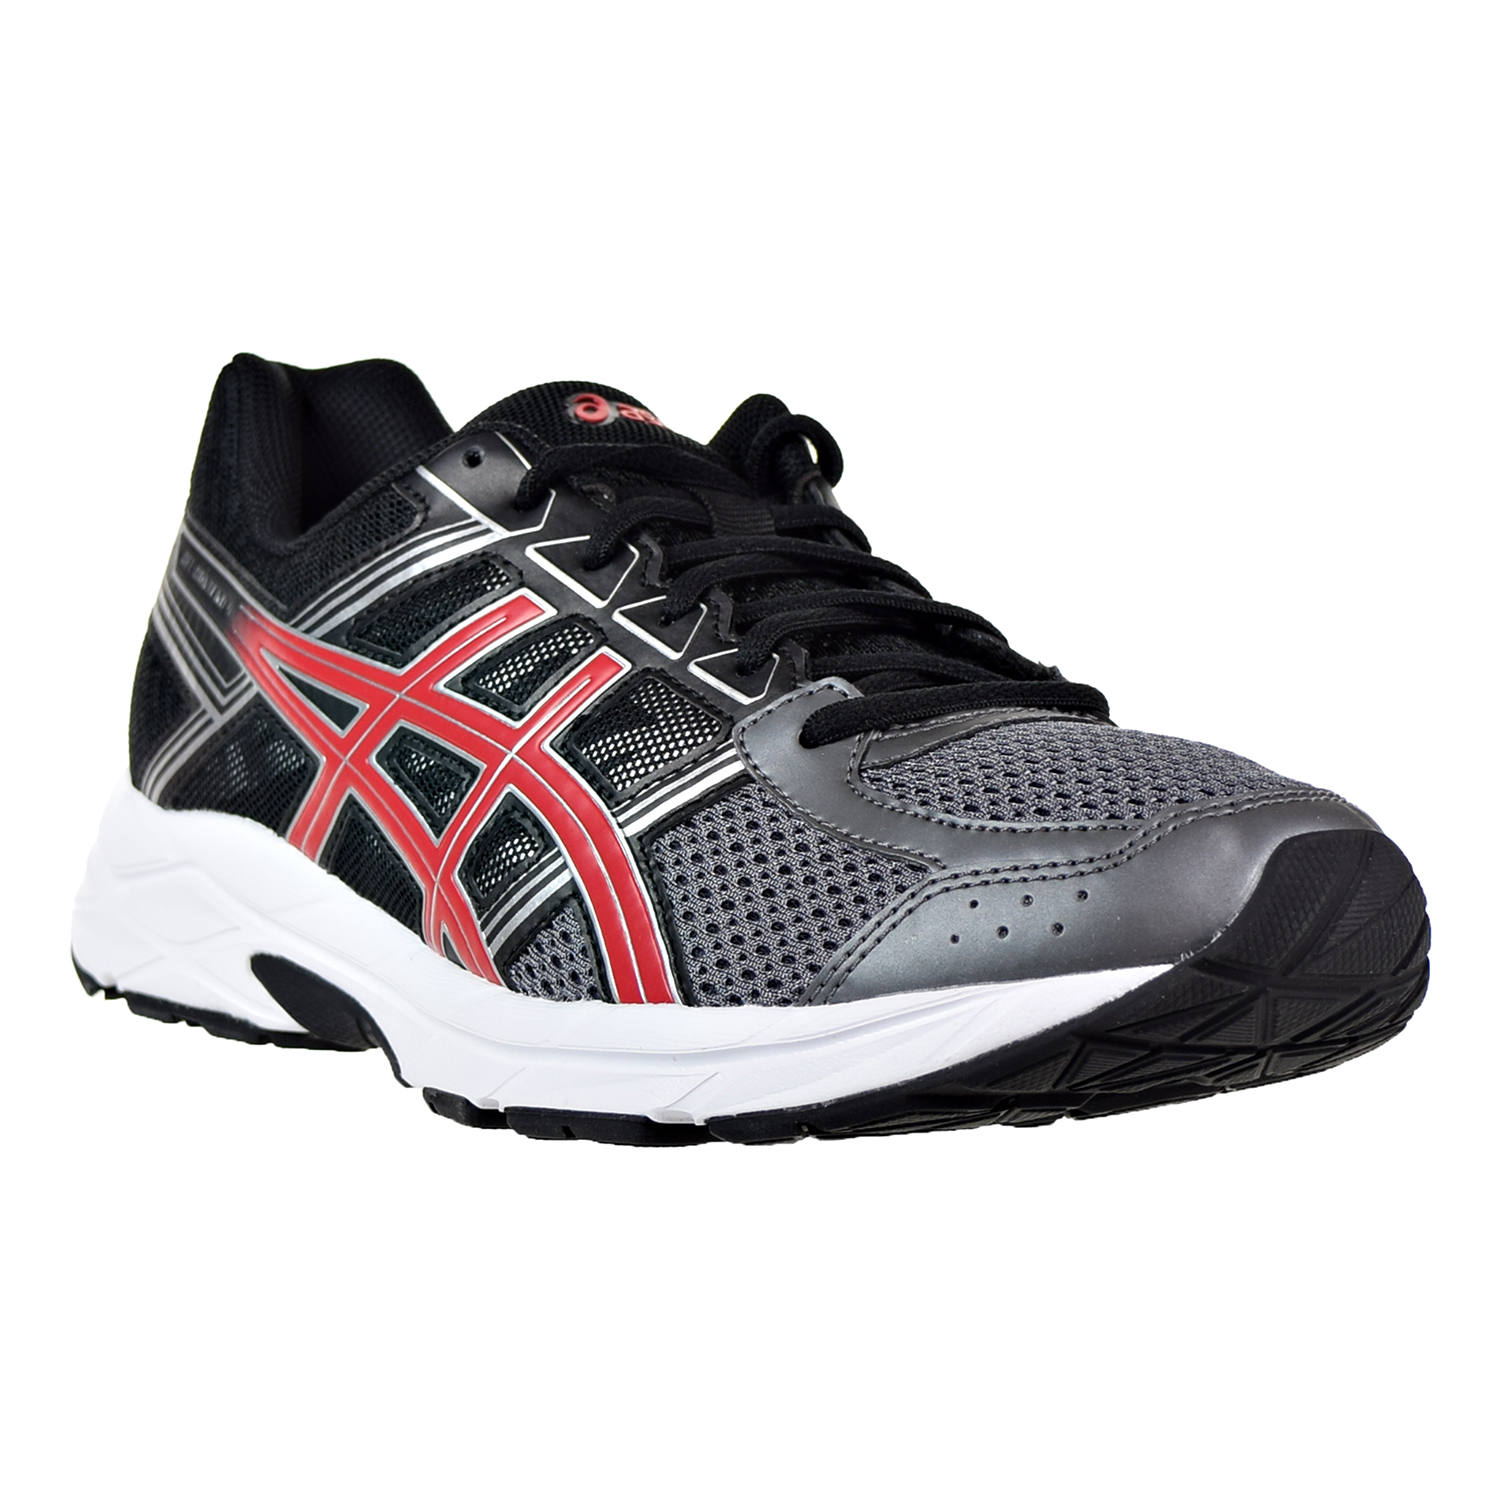 asics t715n review